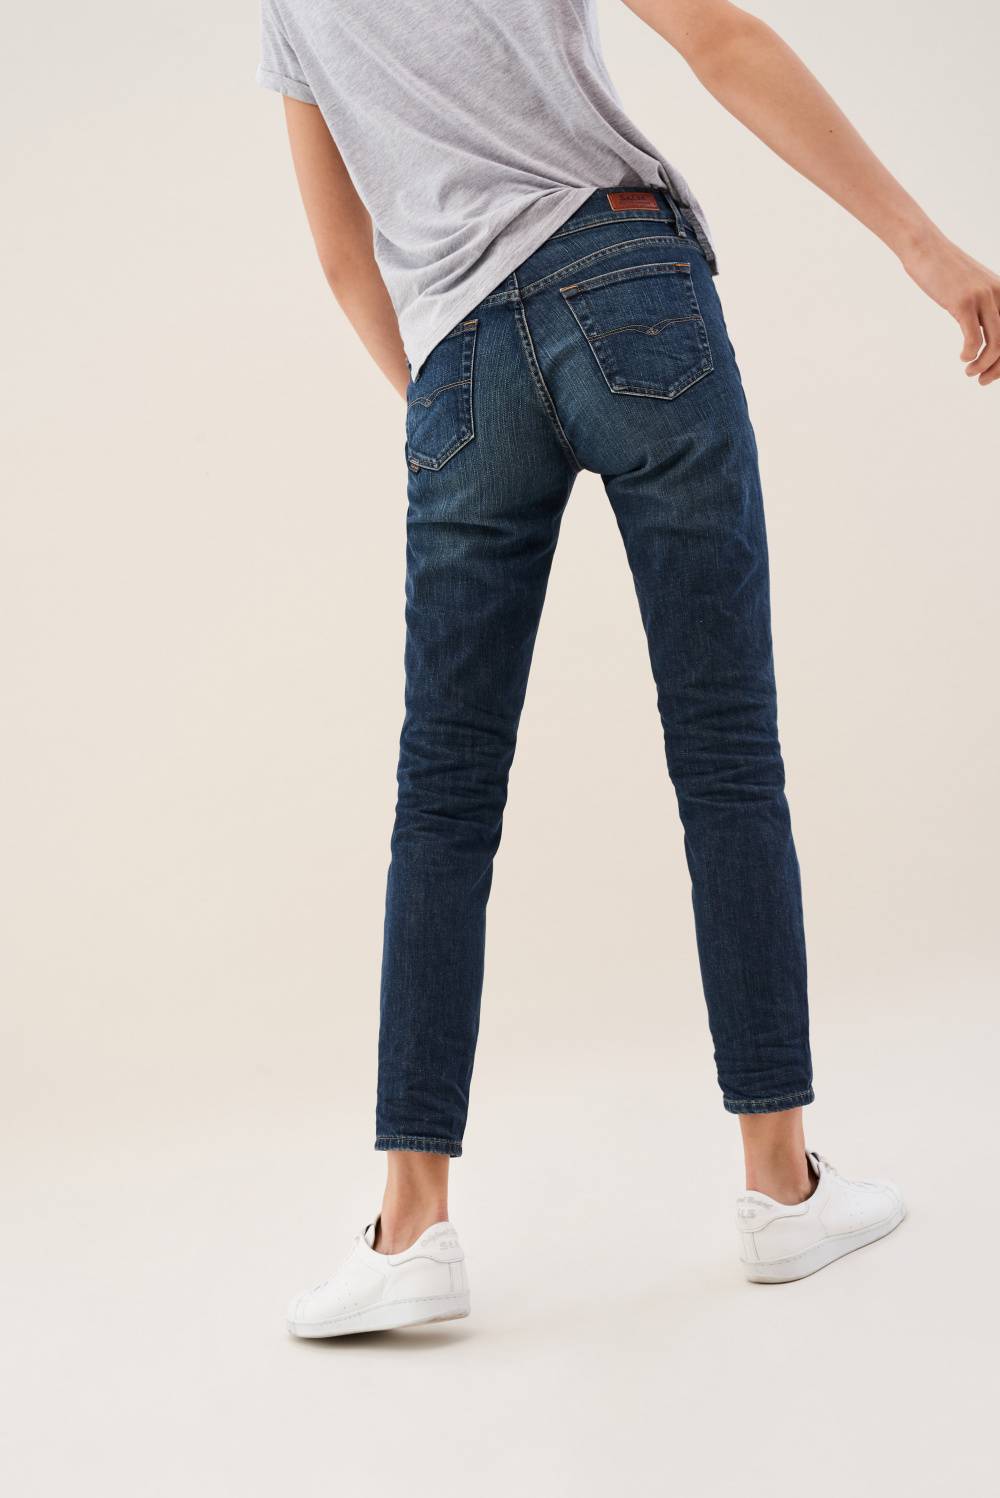 jeans slimming it escuros, Salsa €79,95_3